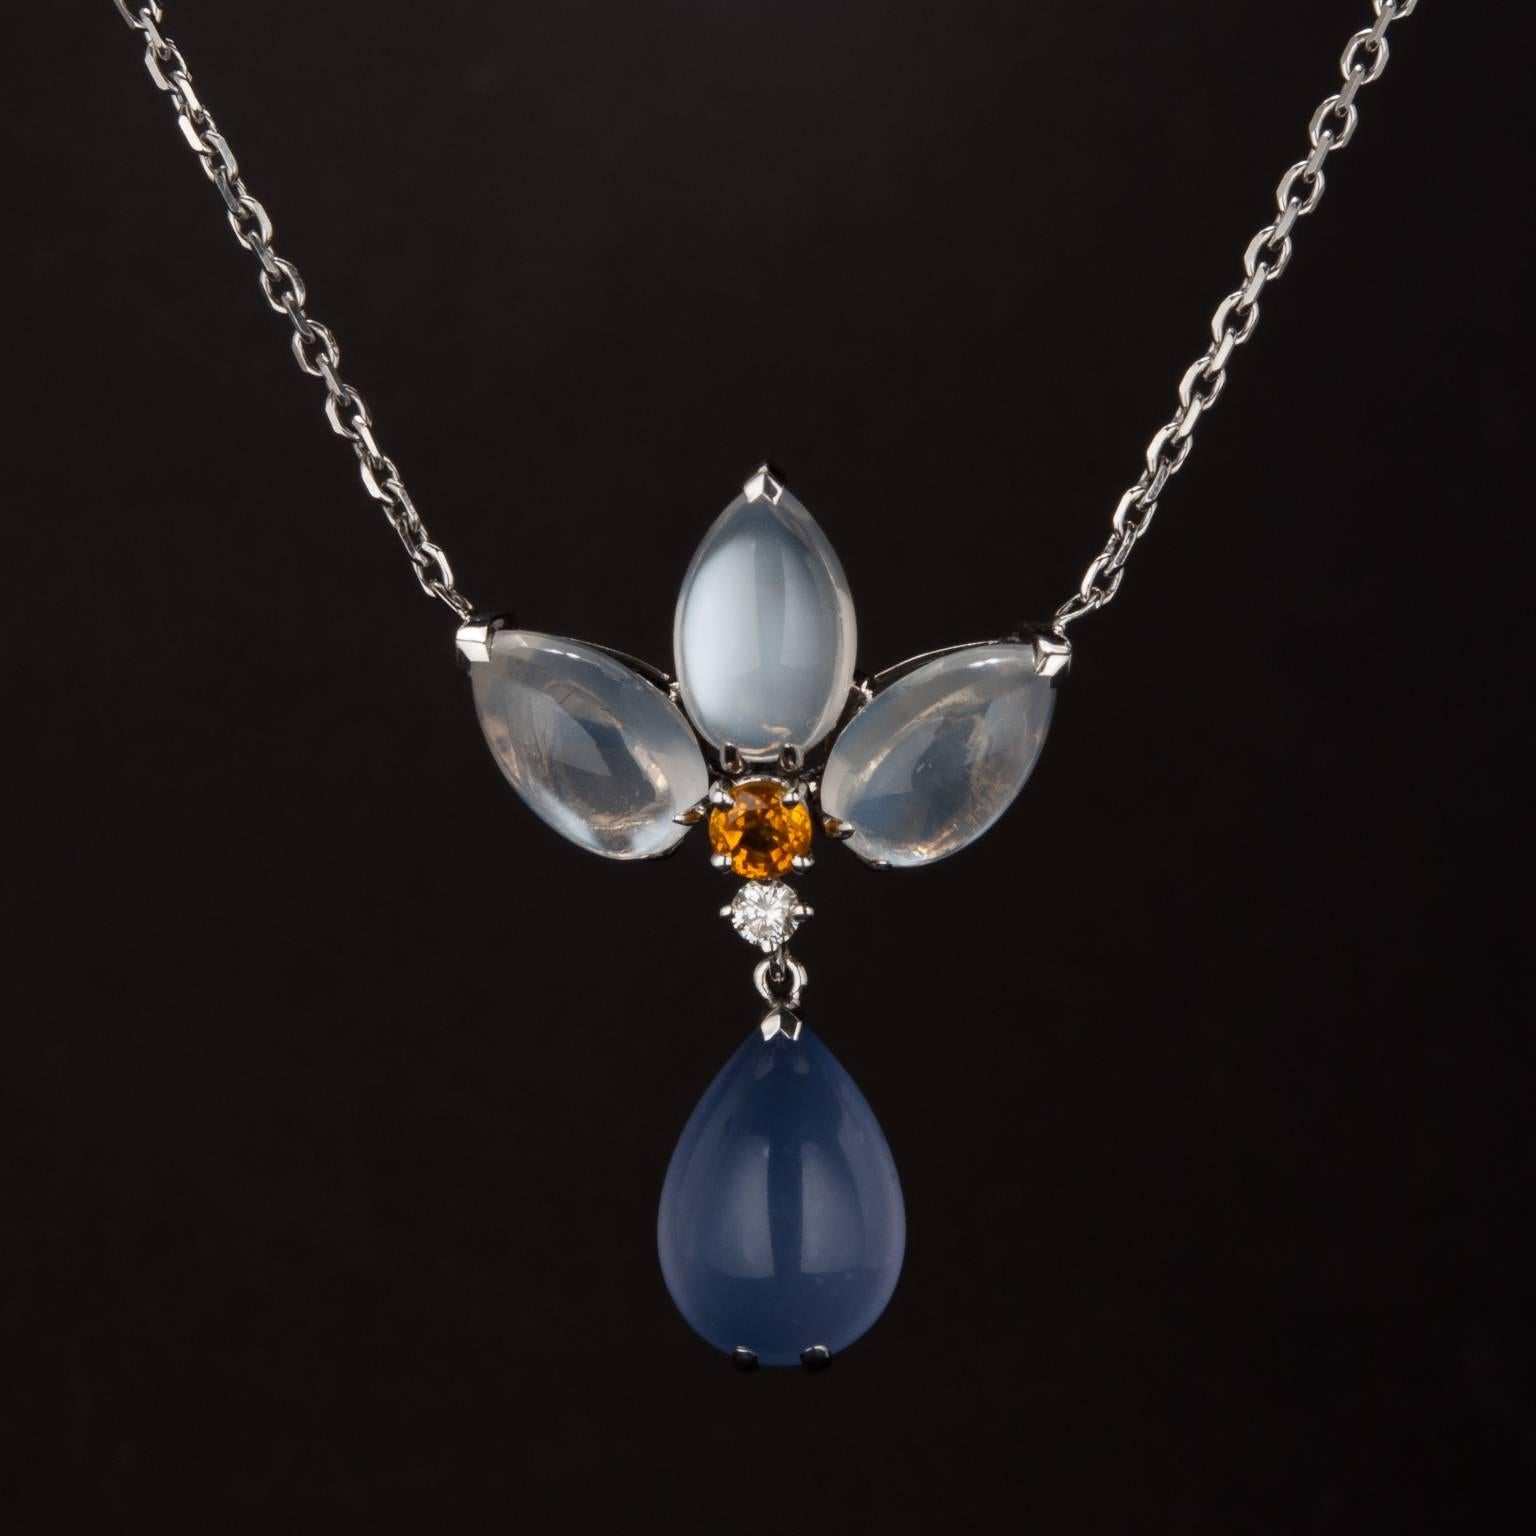 This gorgeous pendant features 9.00 total carats of white and blue moonstone, an eye-catching .10 carat orange sapphire, and a .06 carat diamond accent. The mounting is made in 18k white gold and the pendant rests on a fixed 16 inch 18k white gold